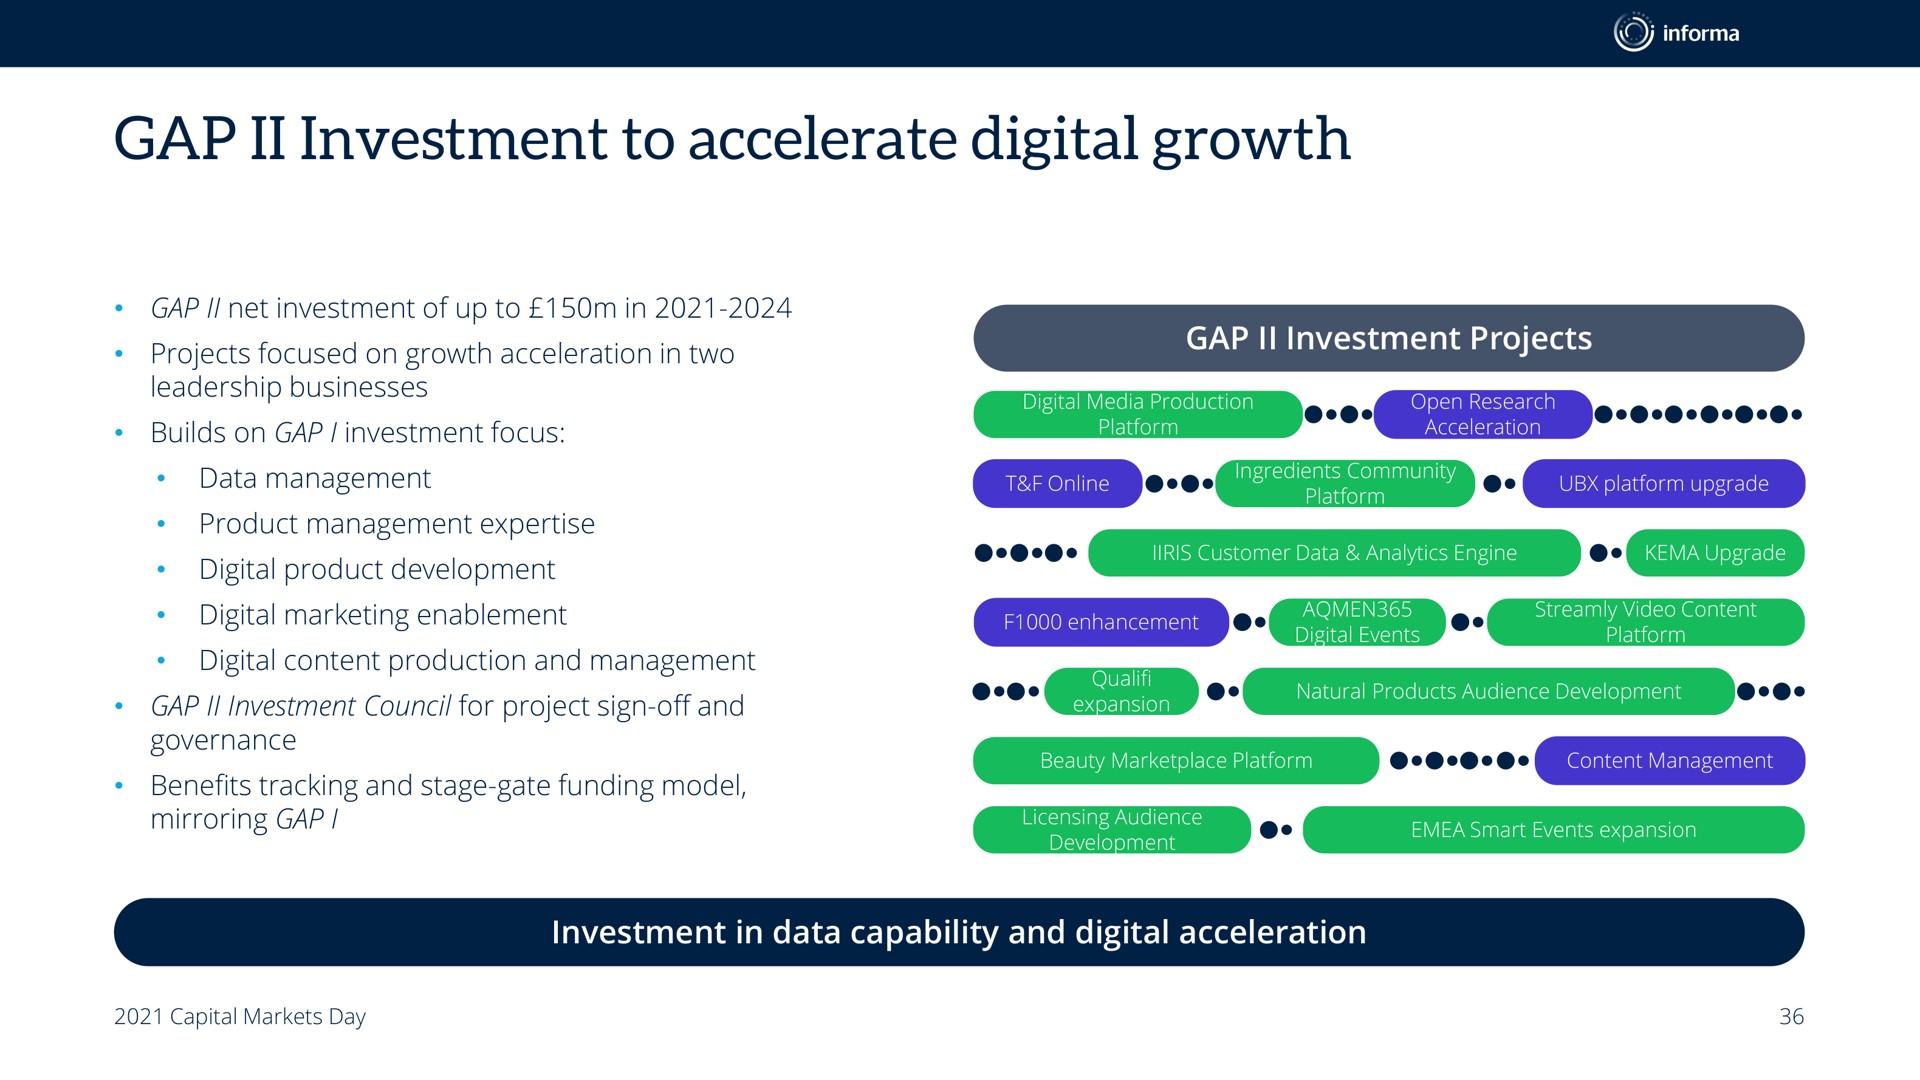 gap investment to accelerate digital growth | Informa